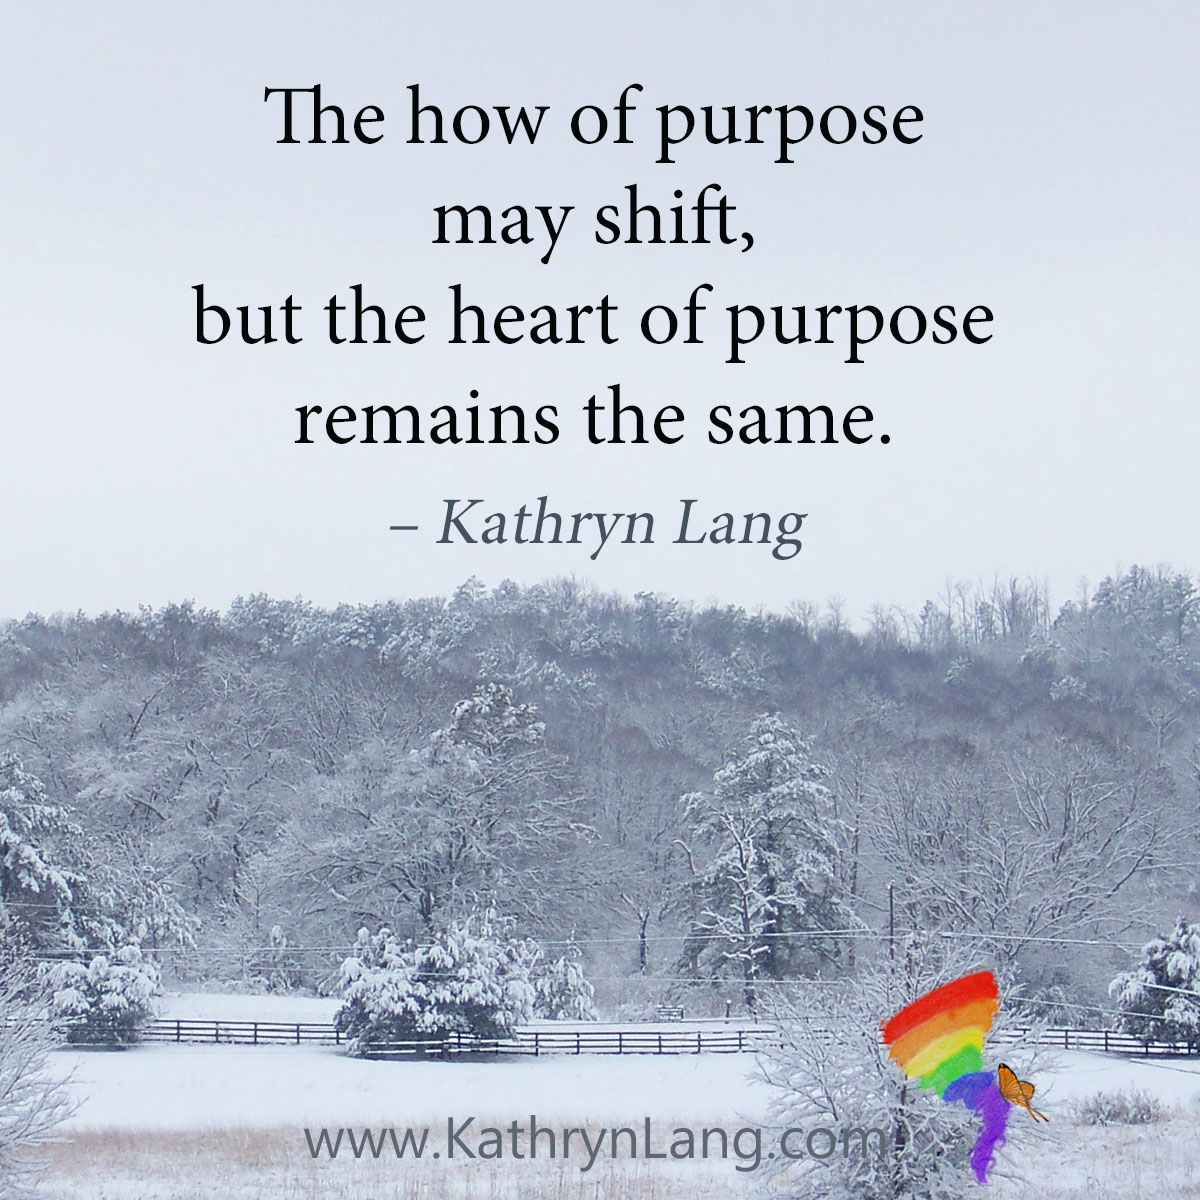 #QuoteoftheDay

The how of purpose may shift, but the heart of purpose remains the same.